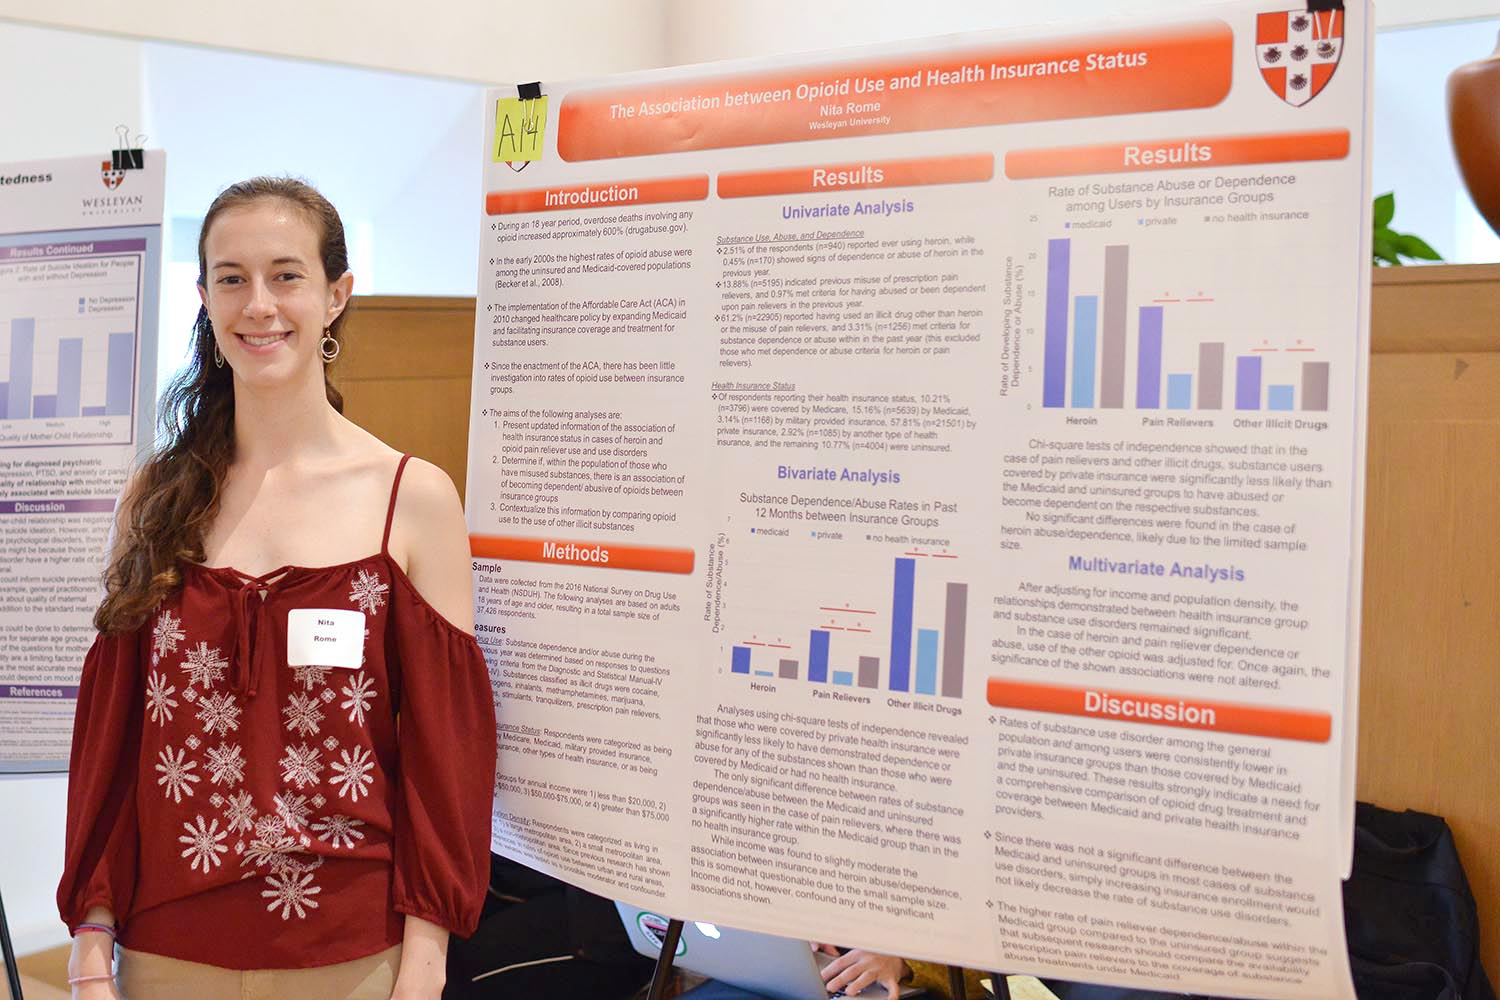 Nita Rome '20 studied and presented on "The Association between Opioid Use and Health Insurance Status."